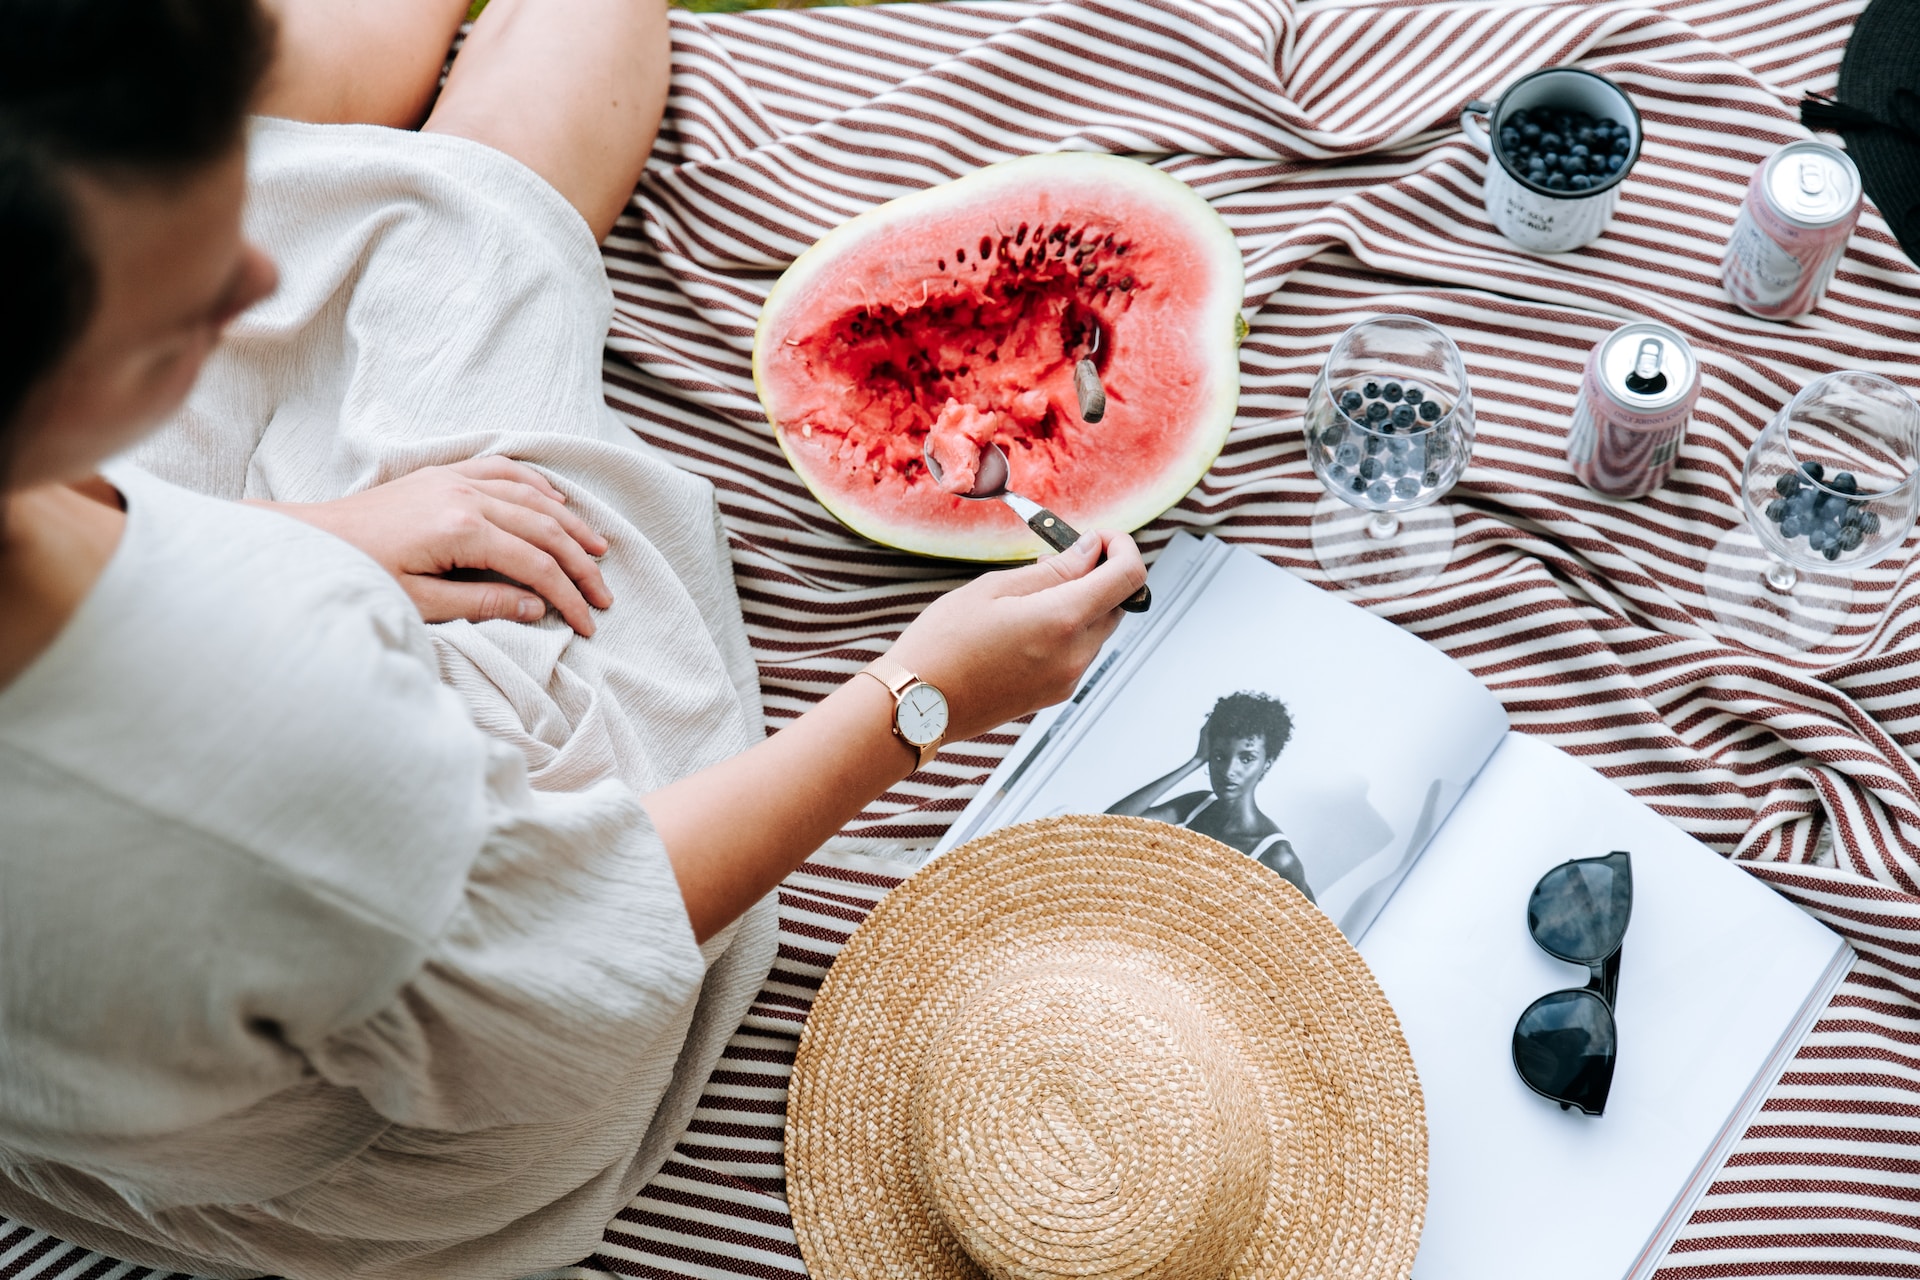 Woman eating watermelon on a blanket.